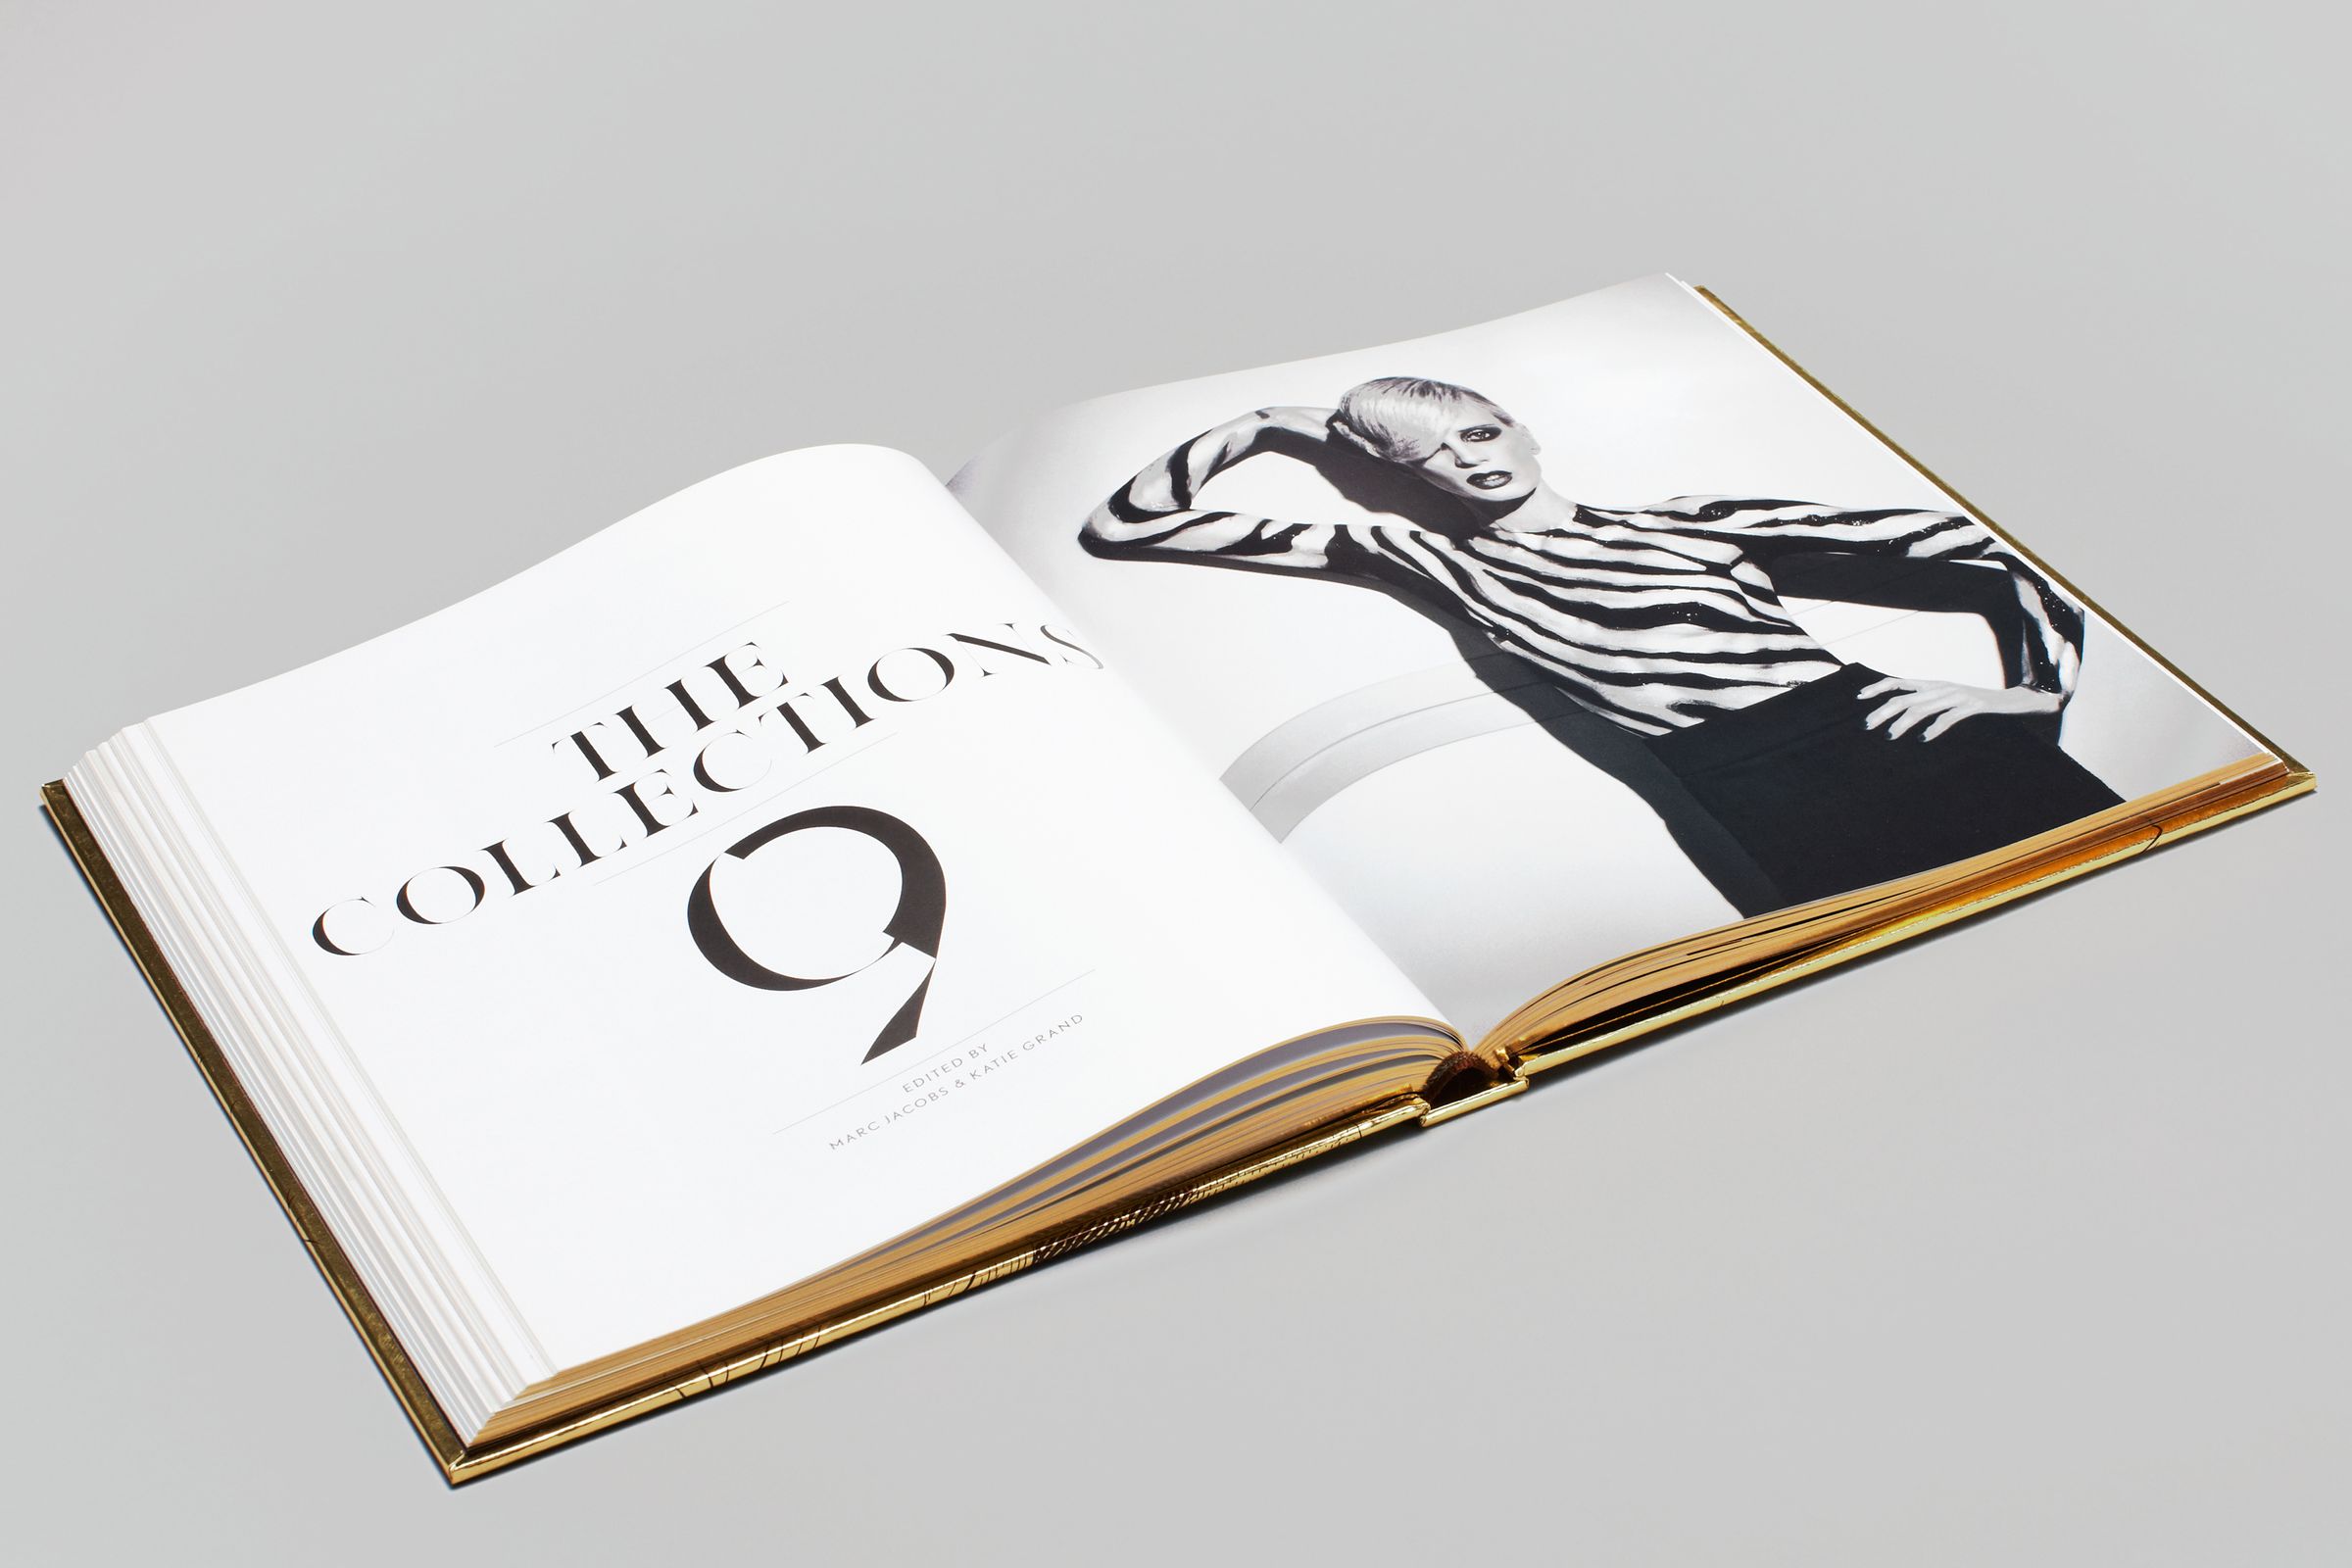 Spread layout design from Louis Vuitton Marc Jacobs book